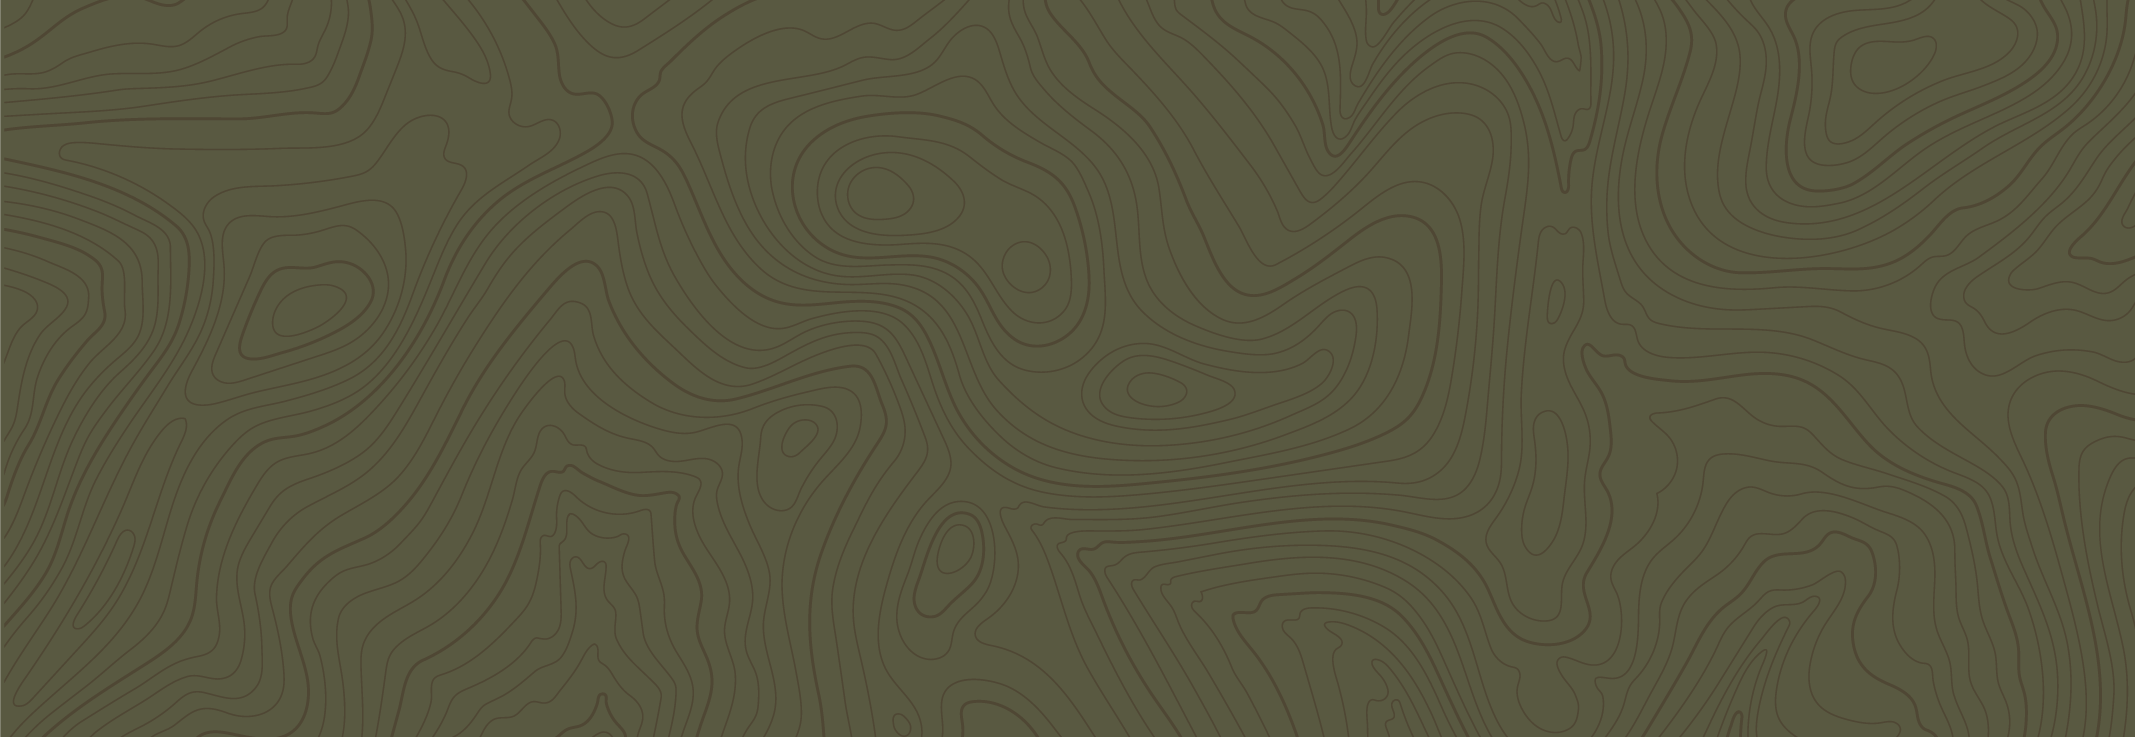 green and black pattern resembling topographic lines on a map